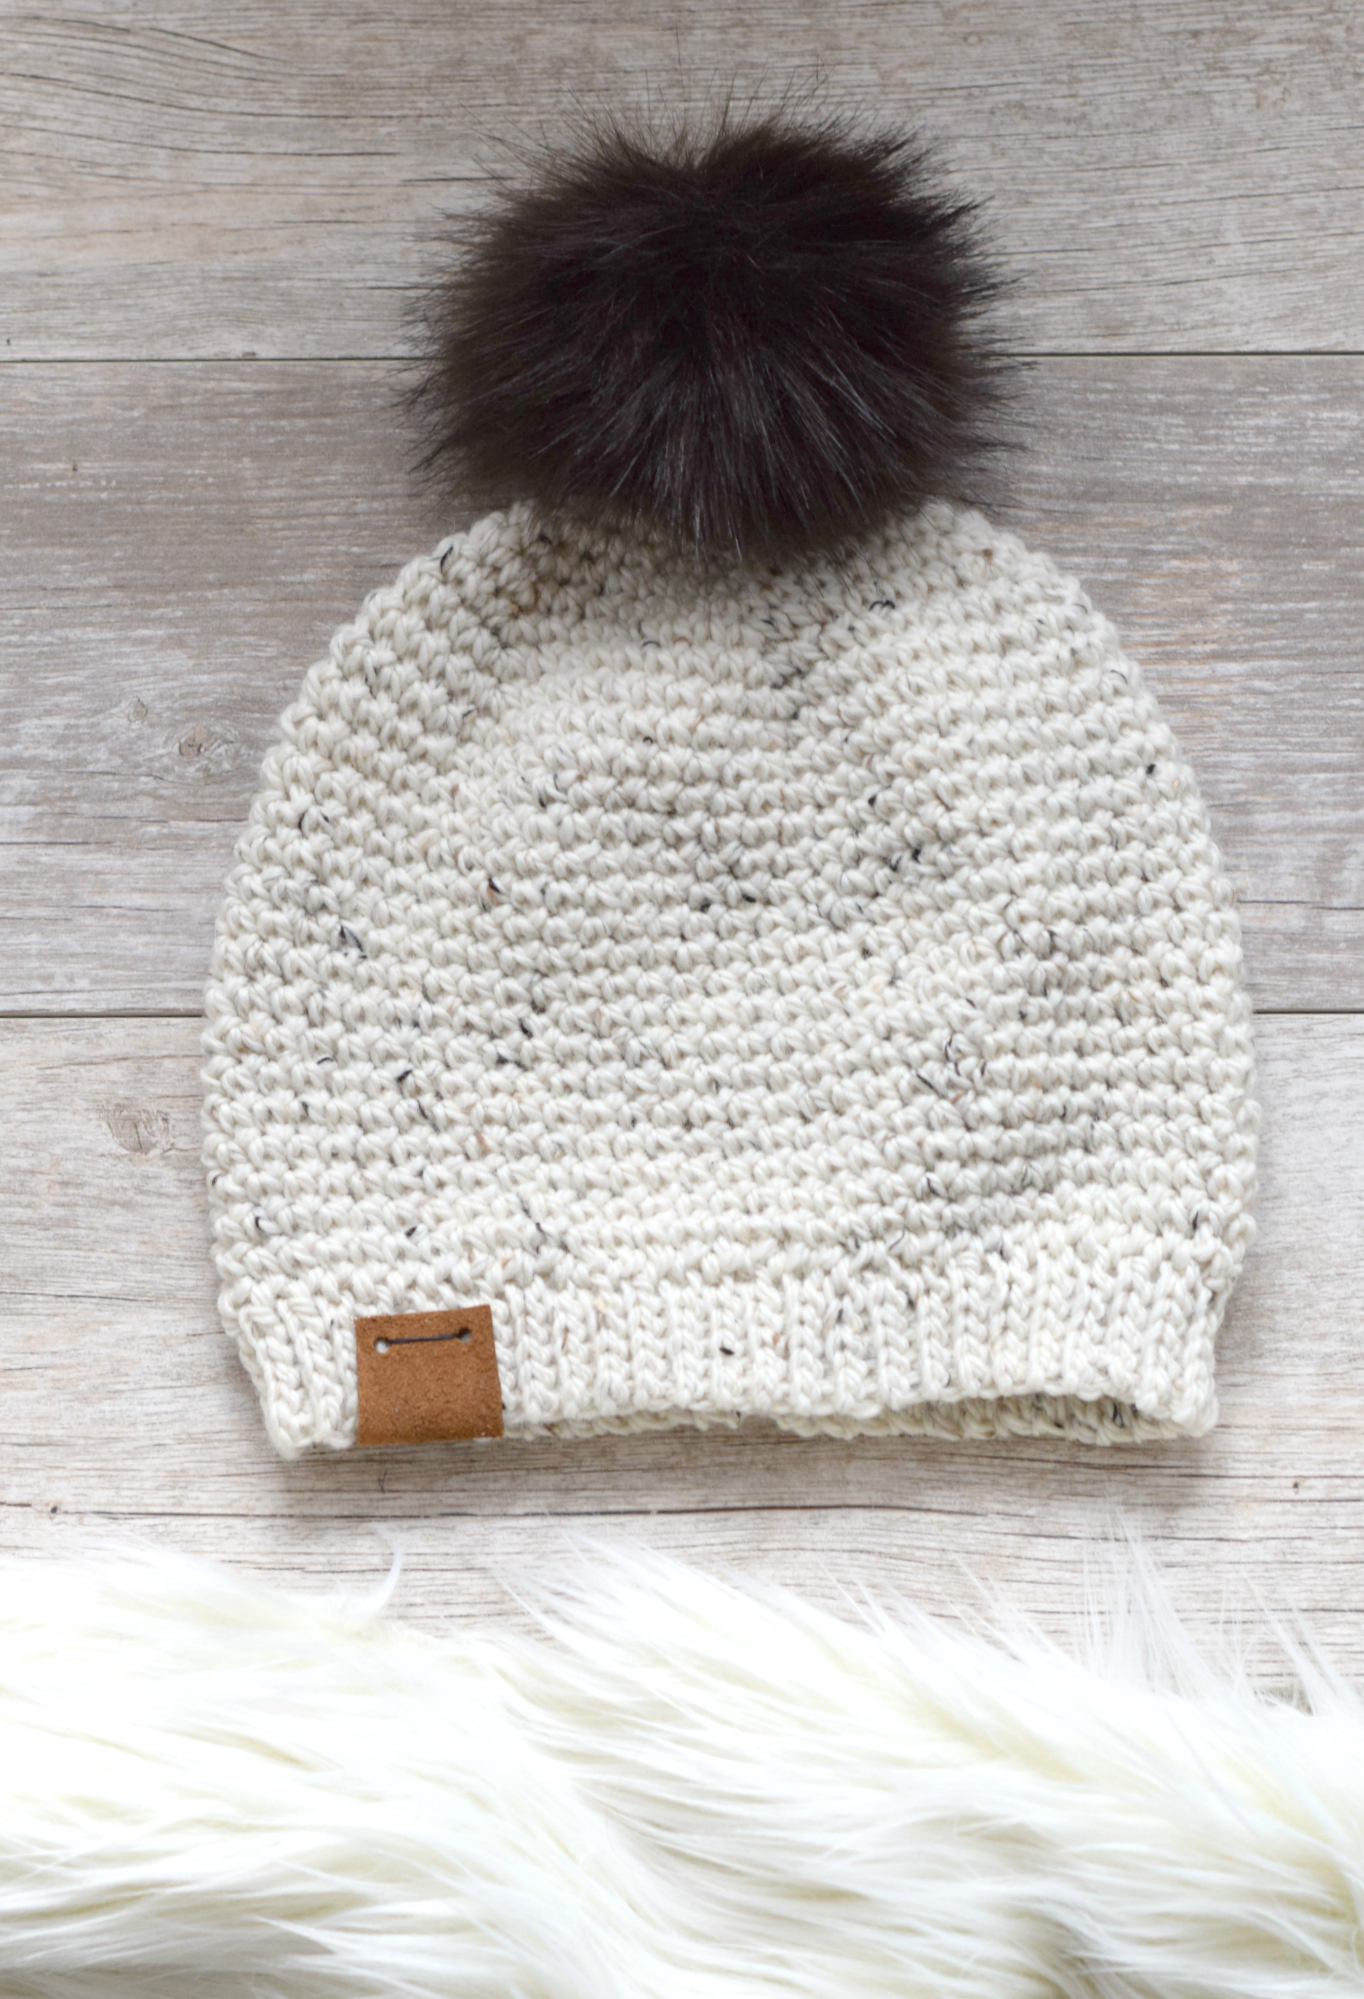 What Size Hat To Make: Easy Guide For Crochet